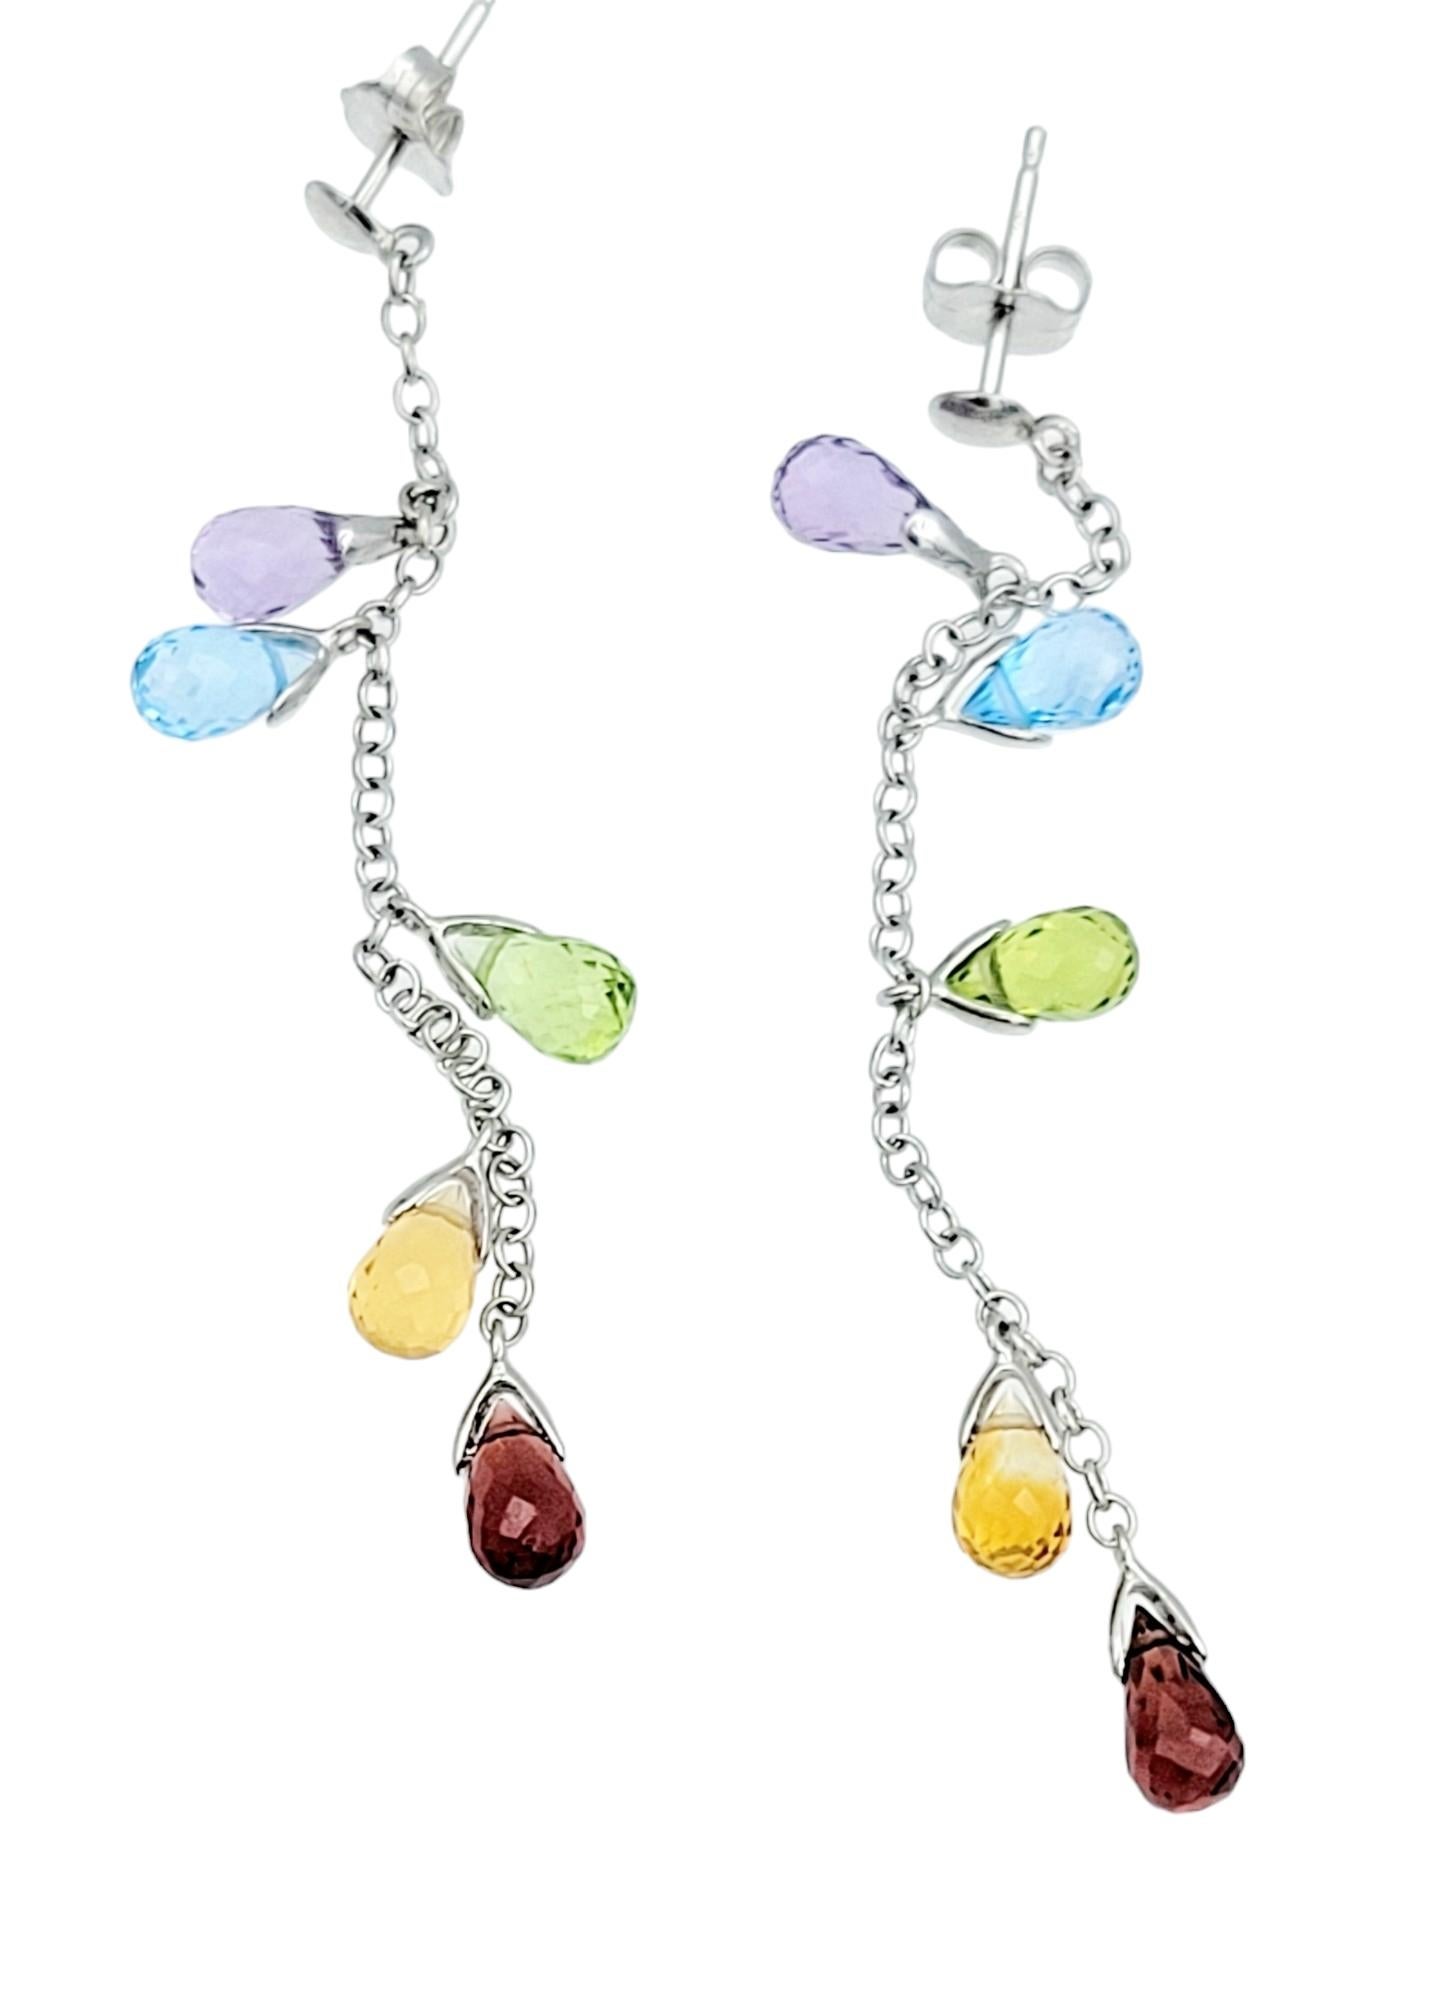 These exquisite dangle earrings, set in radiant 14 karat white gold, boast a vibrant and playful design. The earrings feature a delicate cable chain adorned with briolette-cut gemstones that dangle gracefully in a rainbow order. The sequence of